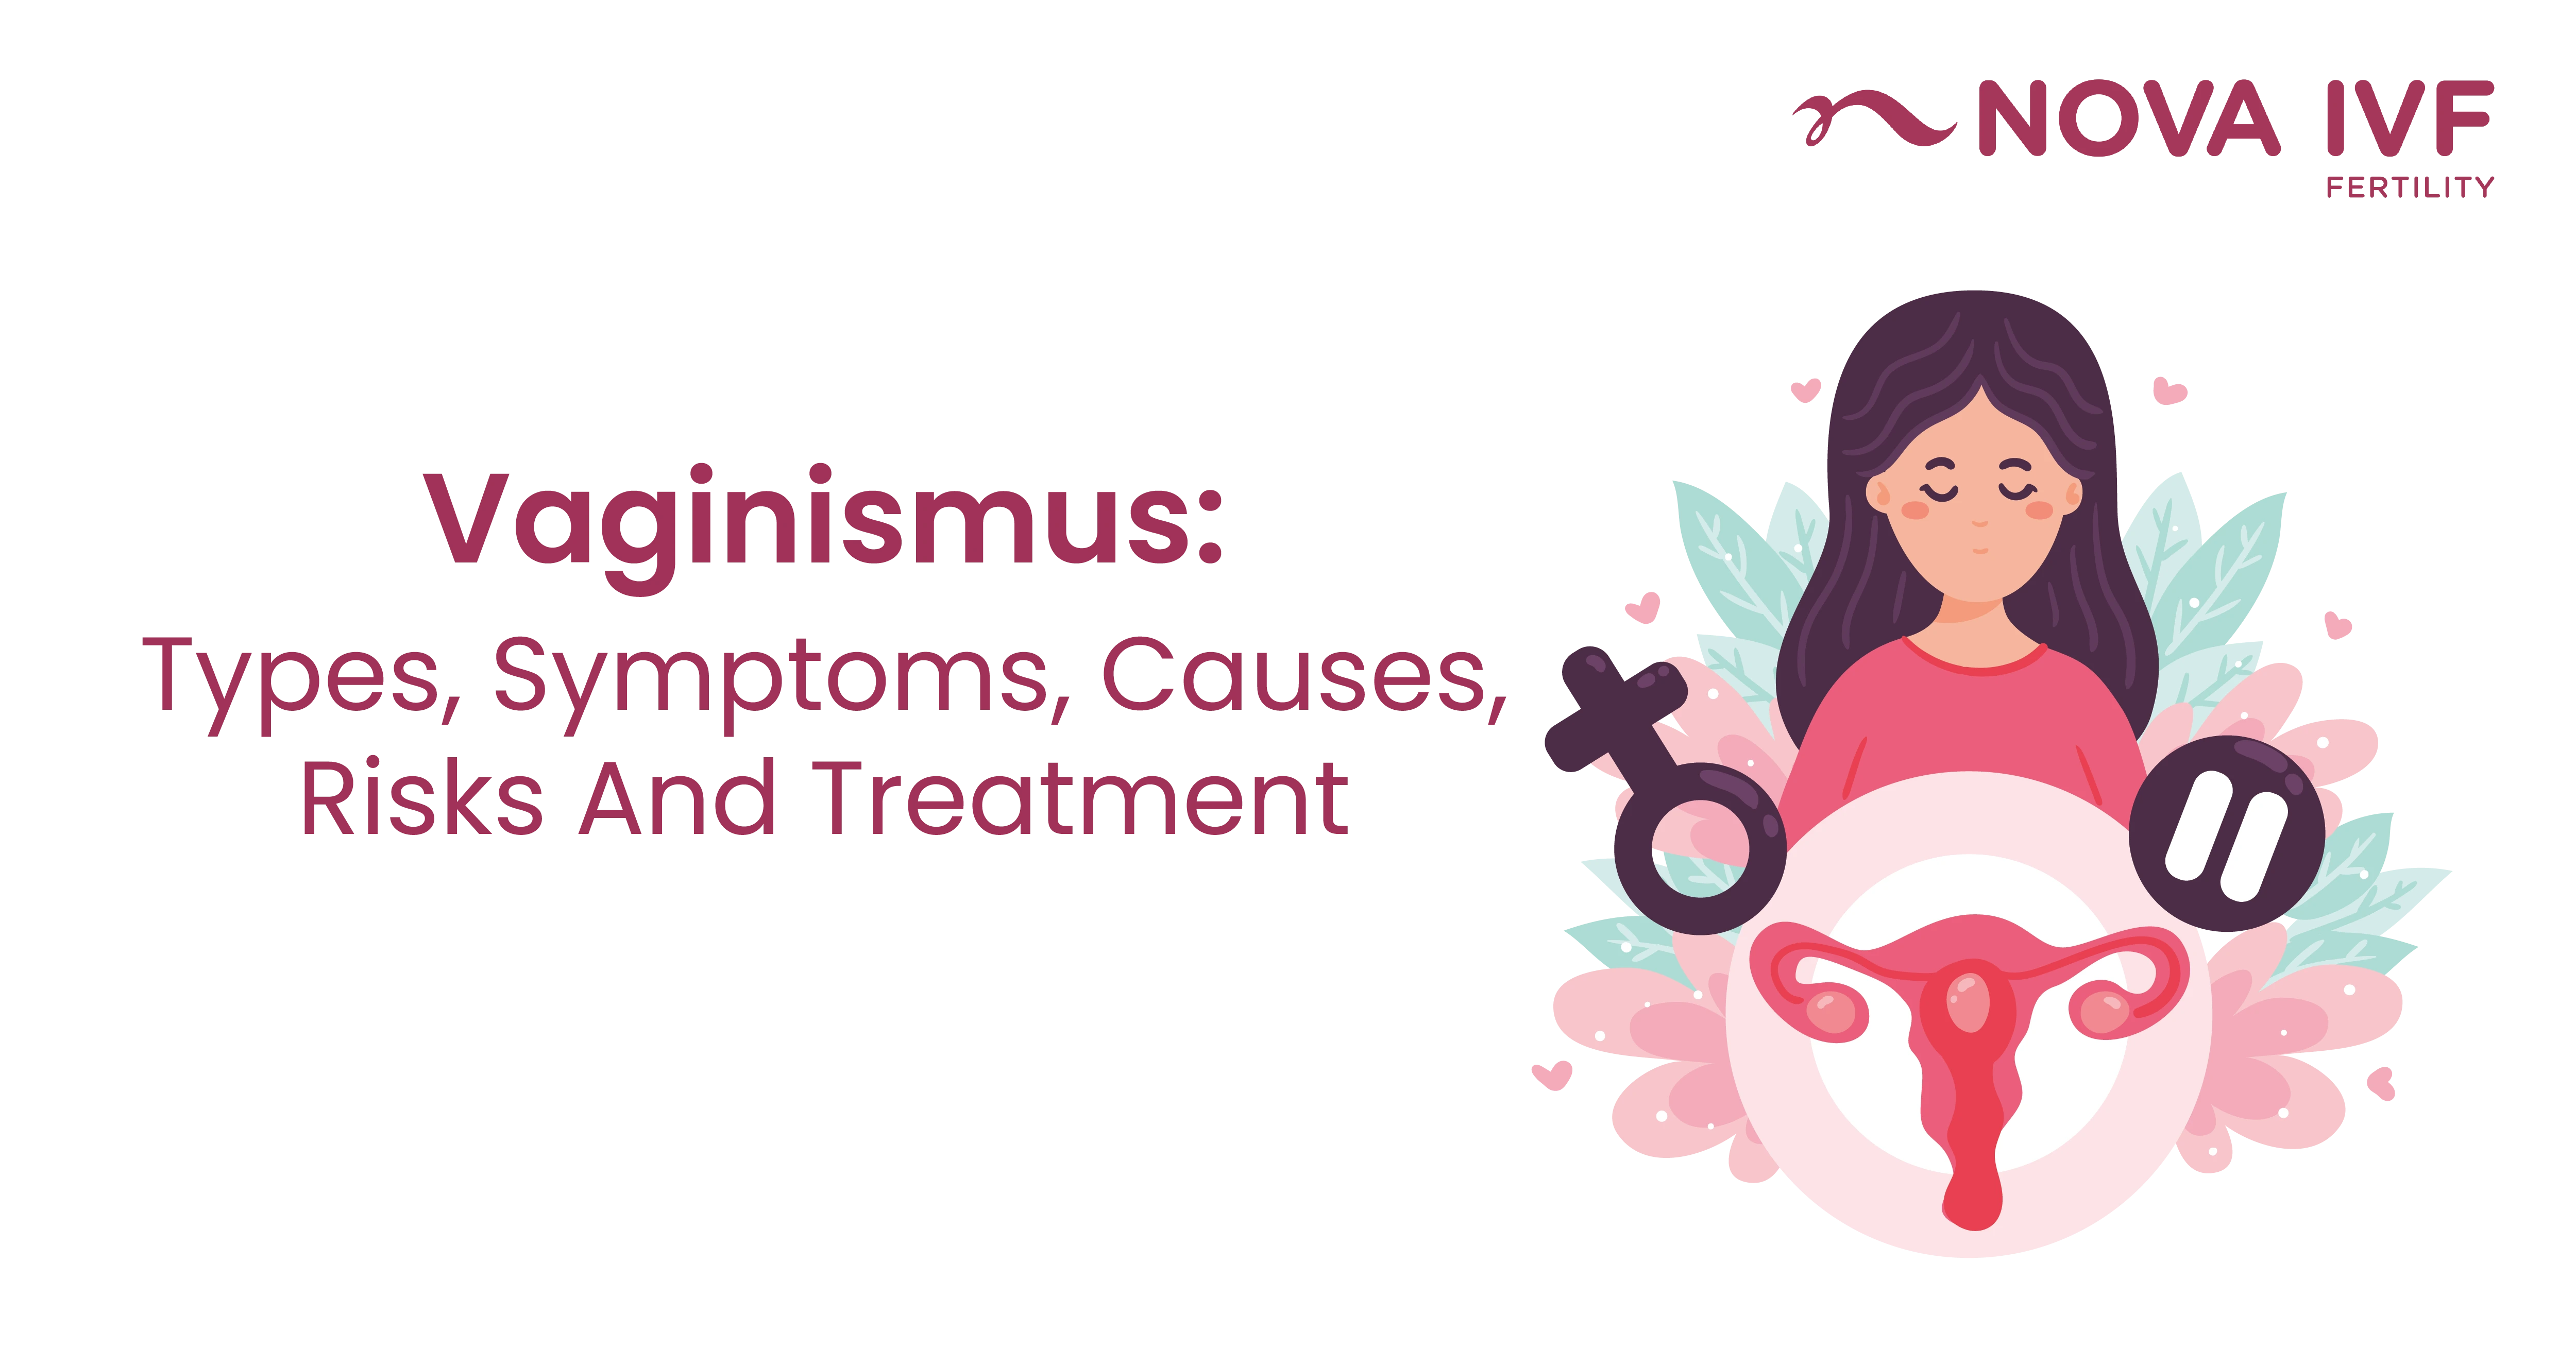 Vaginismus: Types, Symptoms, Causes, Risks And Treatment